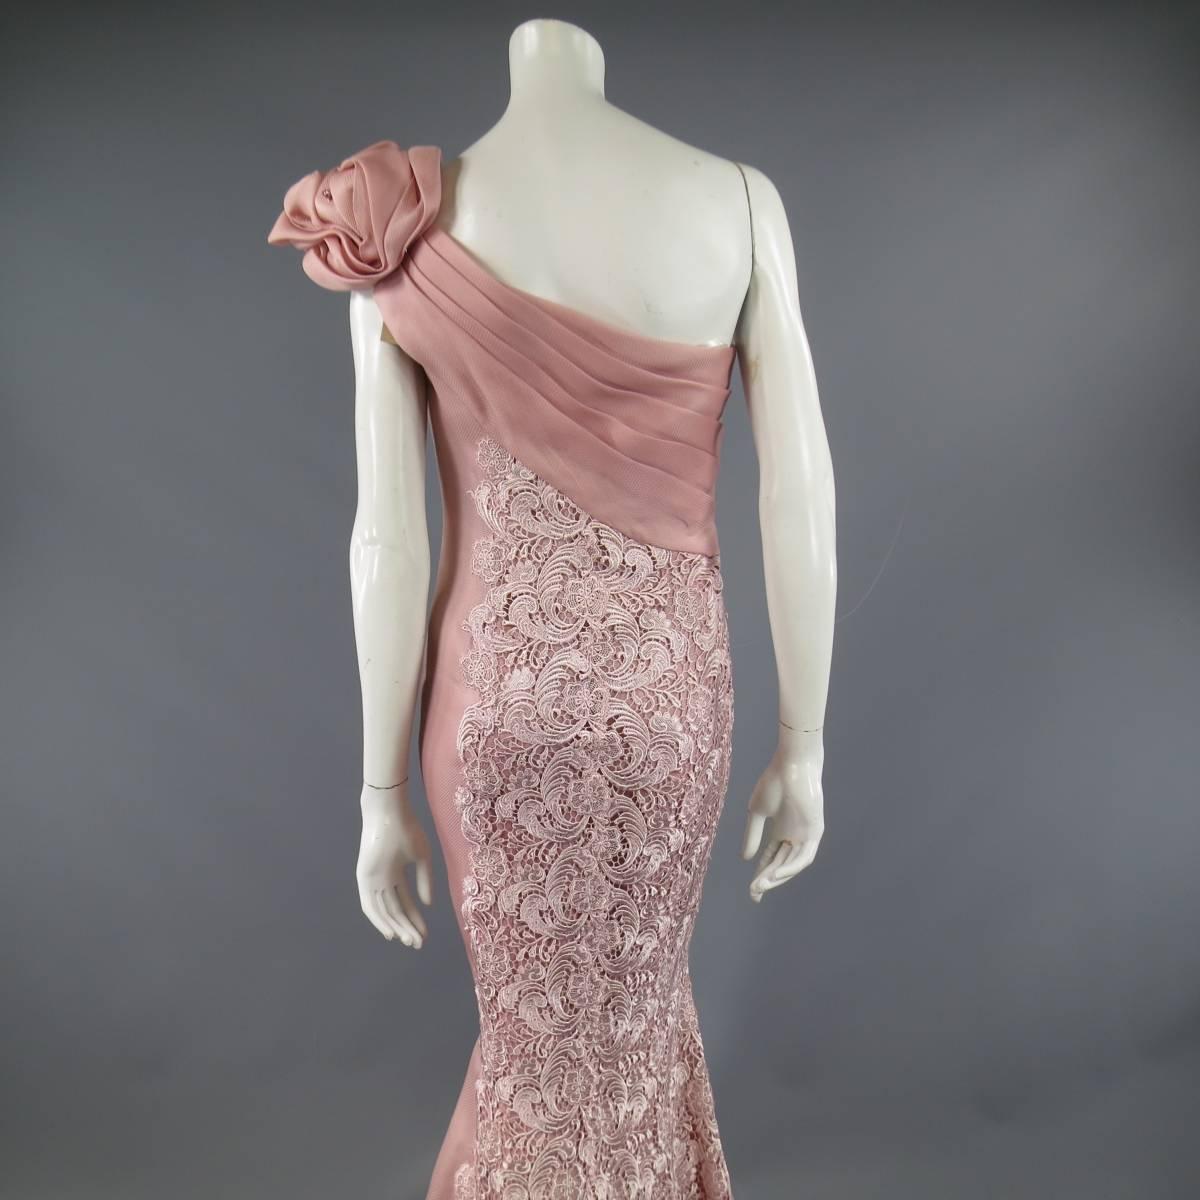 Women's TONY WARD Dress 8 Pink Lace Ruched Shoulder Rufle Evening Gown - Retails $3800